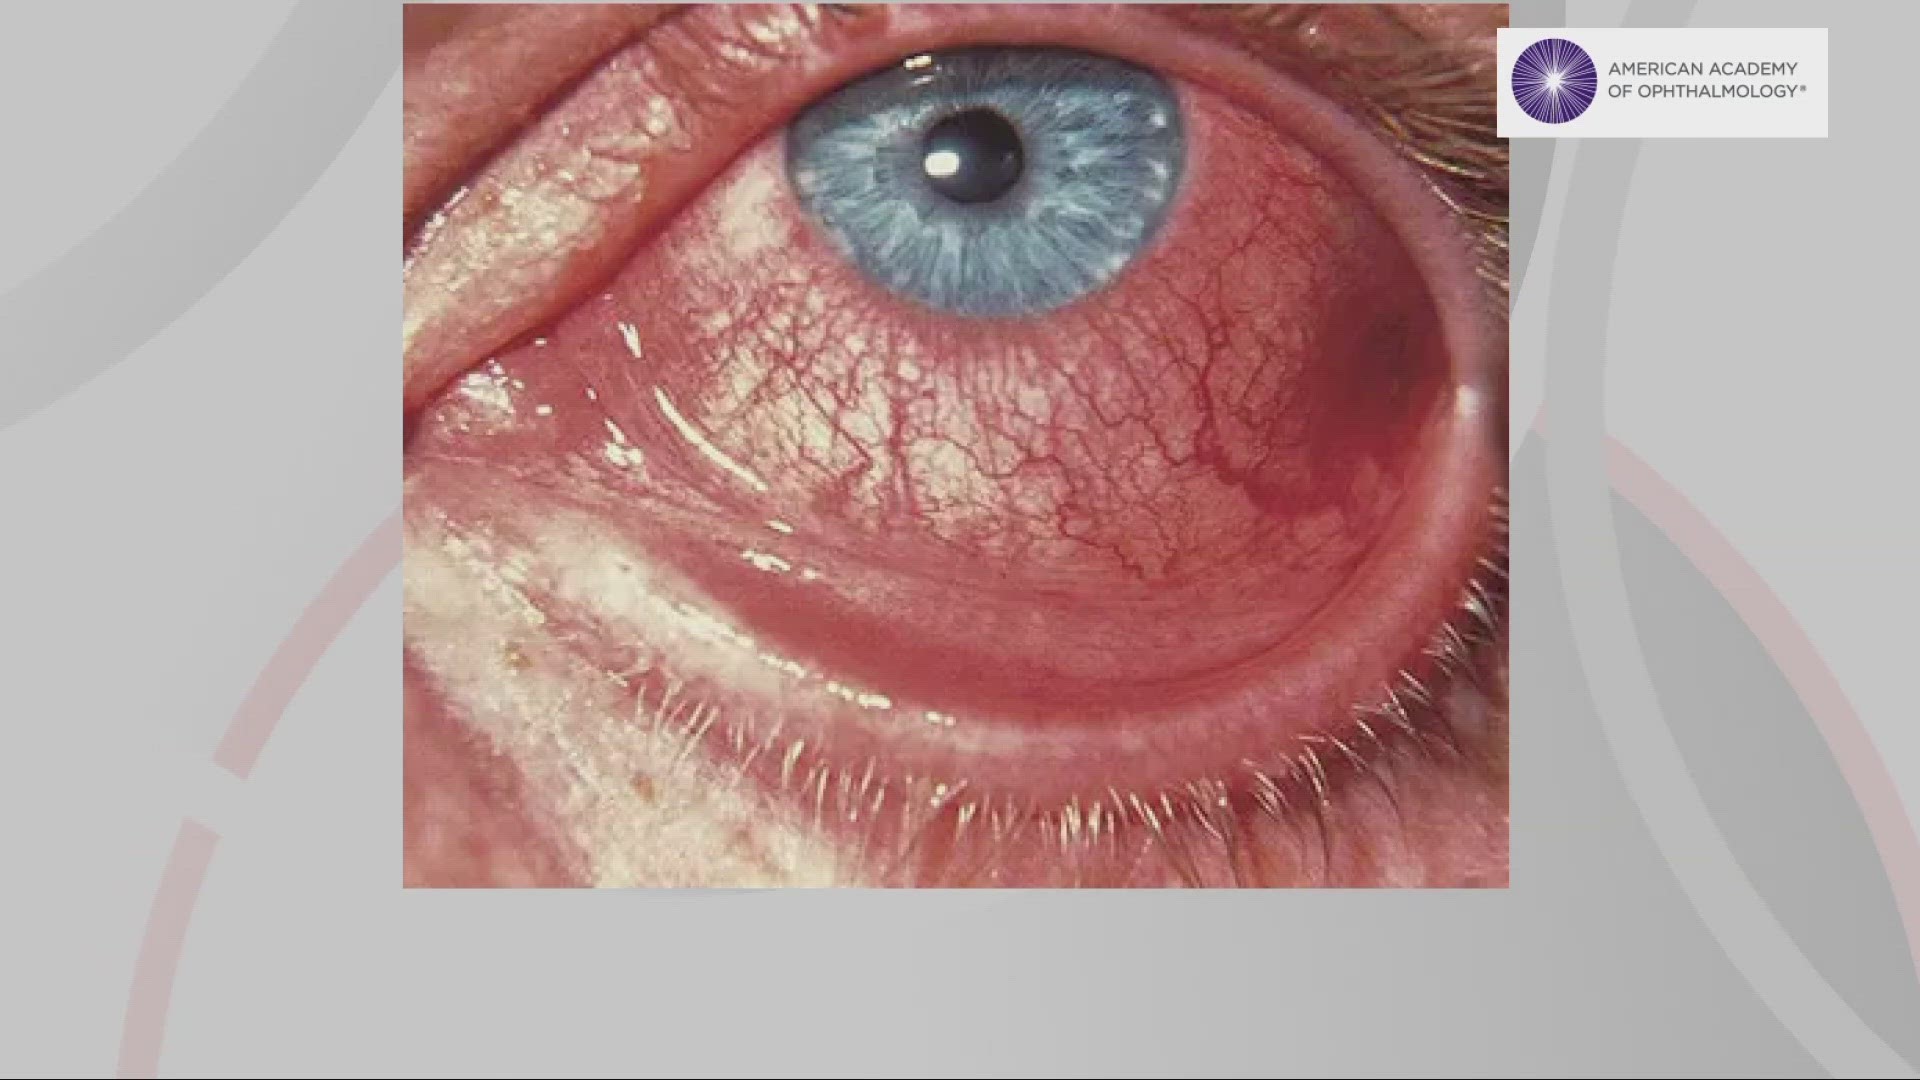 A new COVID variant that is spreading across the US may cause conjunctivitis, a common eye infection known as pink eye.